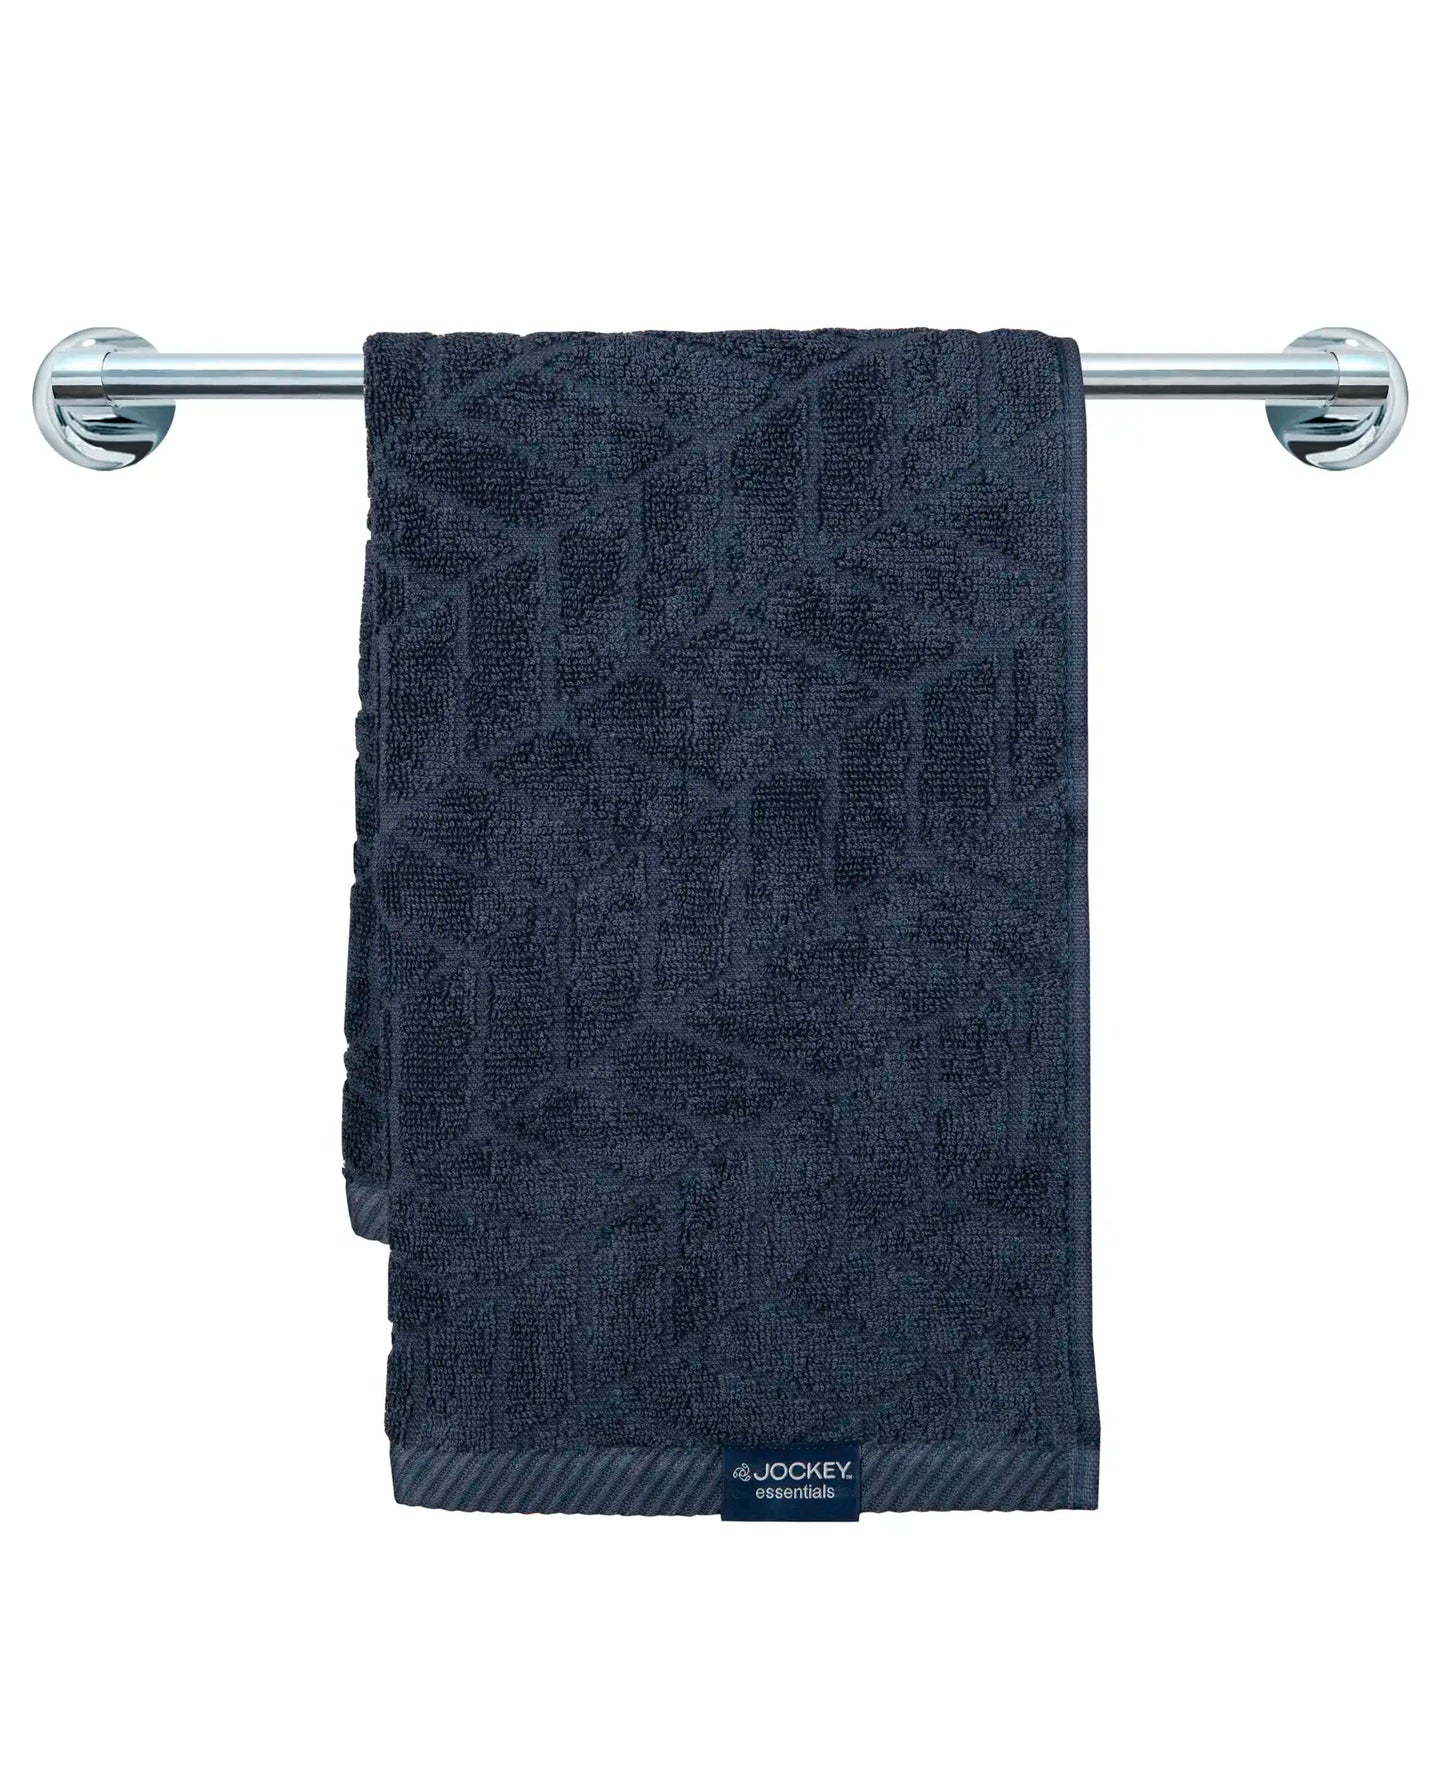 Cotton Terry Ultrasoft and Durable Patterned Hand Towel - Navy-4